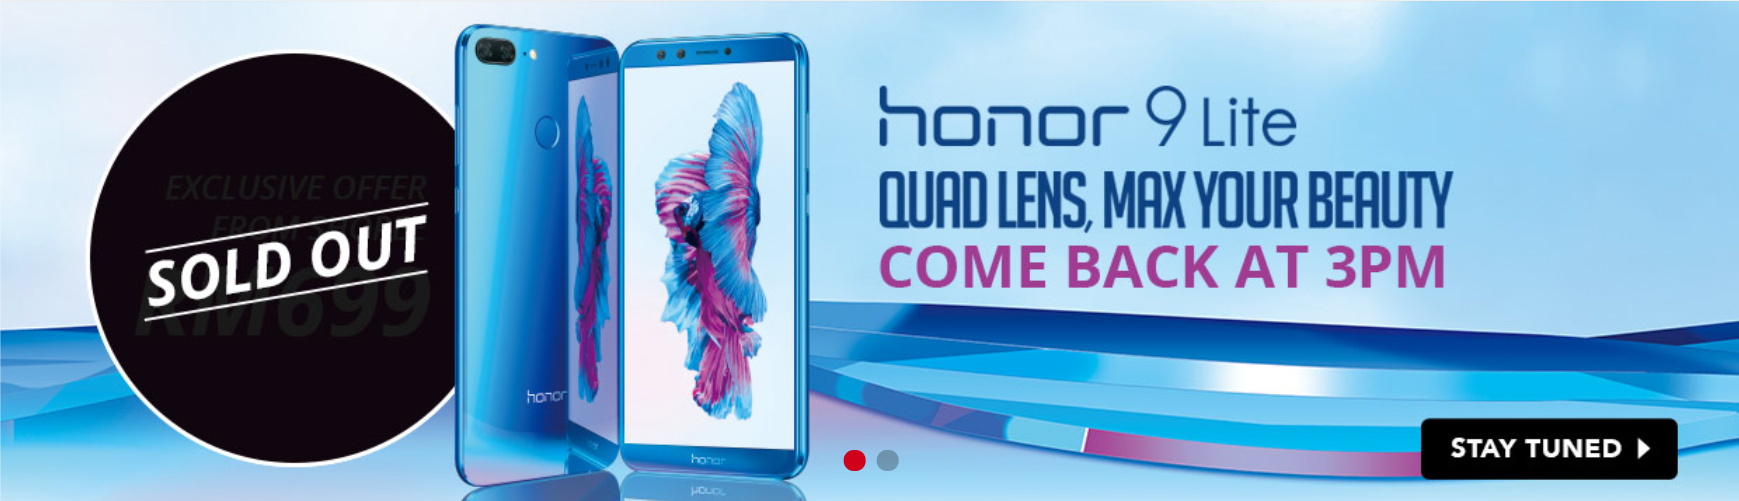 honor 9 Lites' first Shocking Sale campaign sold out, another one coming at 3PM today for RM699